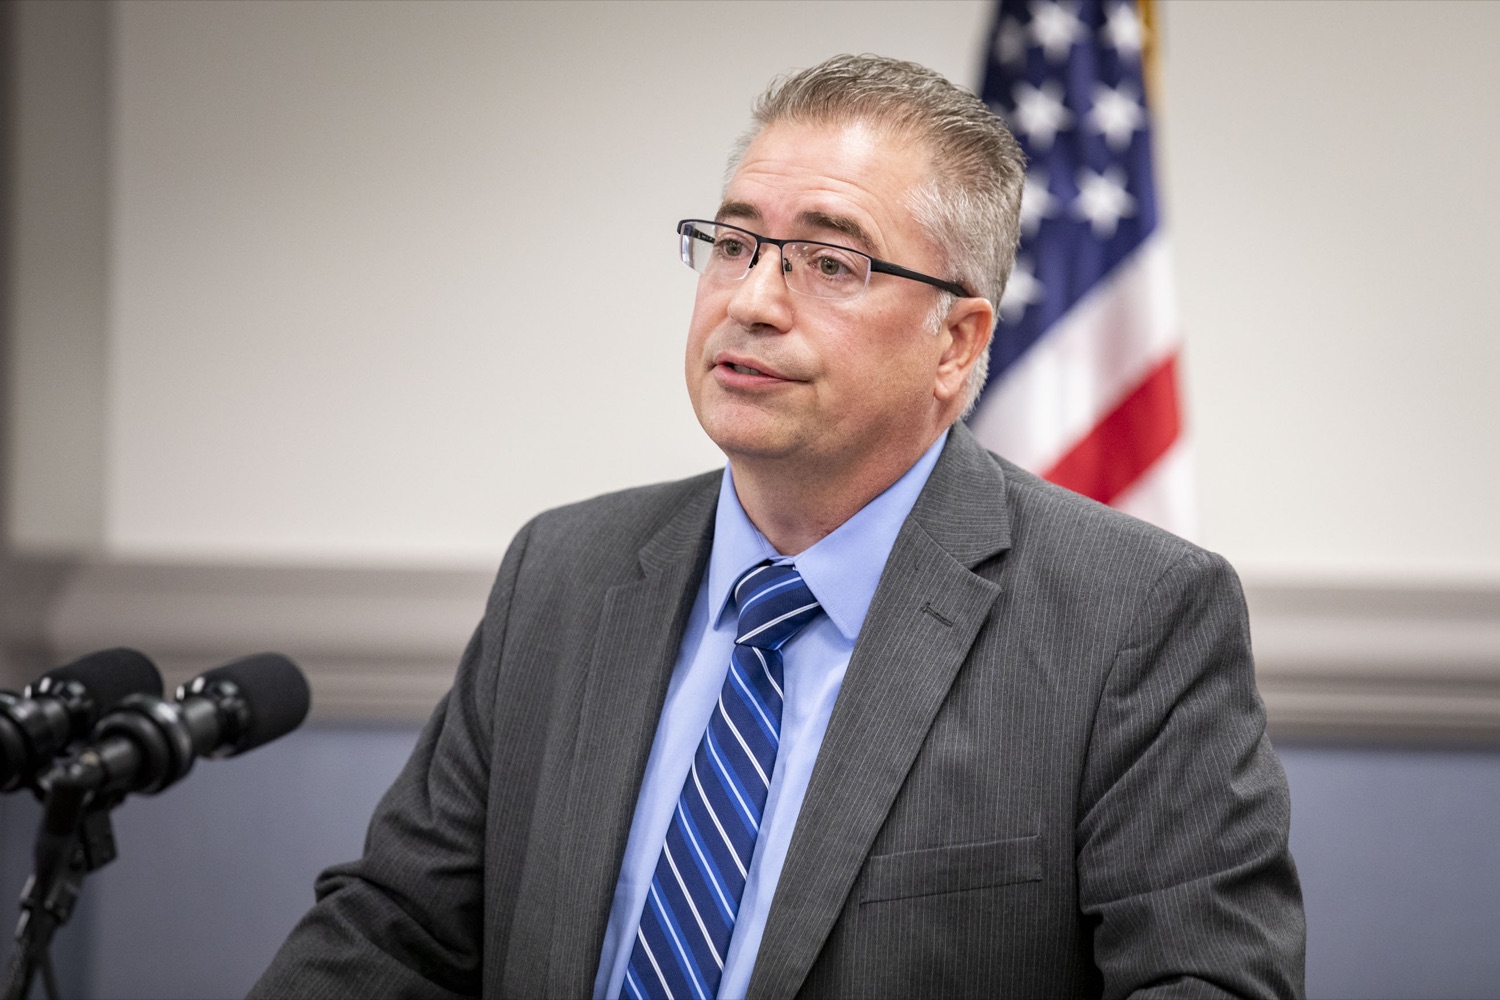 Risk Management Director Brent Lawson discusses enhancements to fight against fraudulent driver license or identification cards being produced or used, in Enola, PA on September 22, 2022.<br><a href="https://filesource.amperwave.net/commonwealthofpa/photo/22223_dot_security_cz_18.jpg" target="_blank">⇣ Download Photo</a>